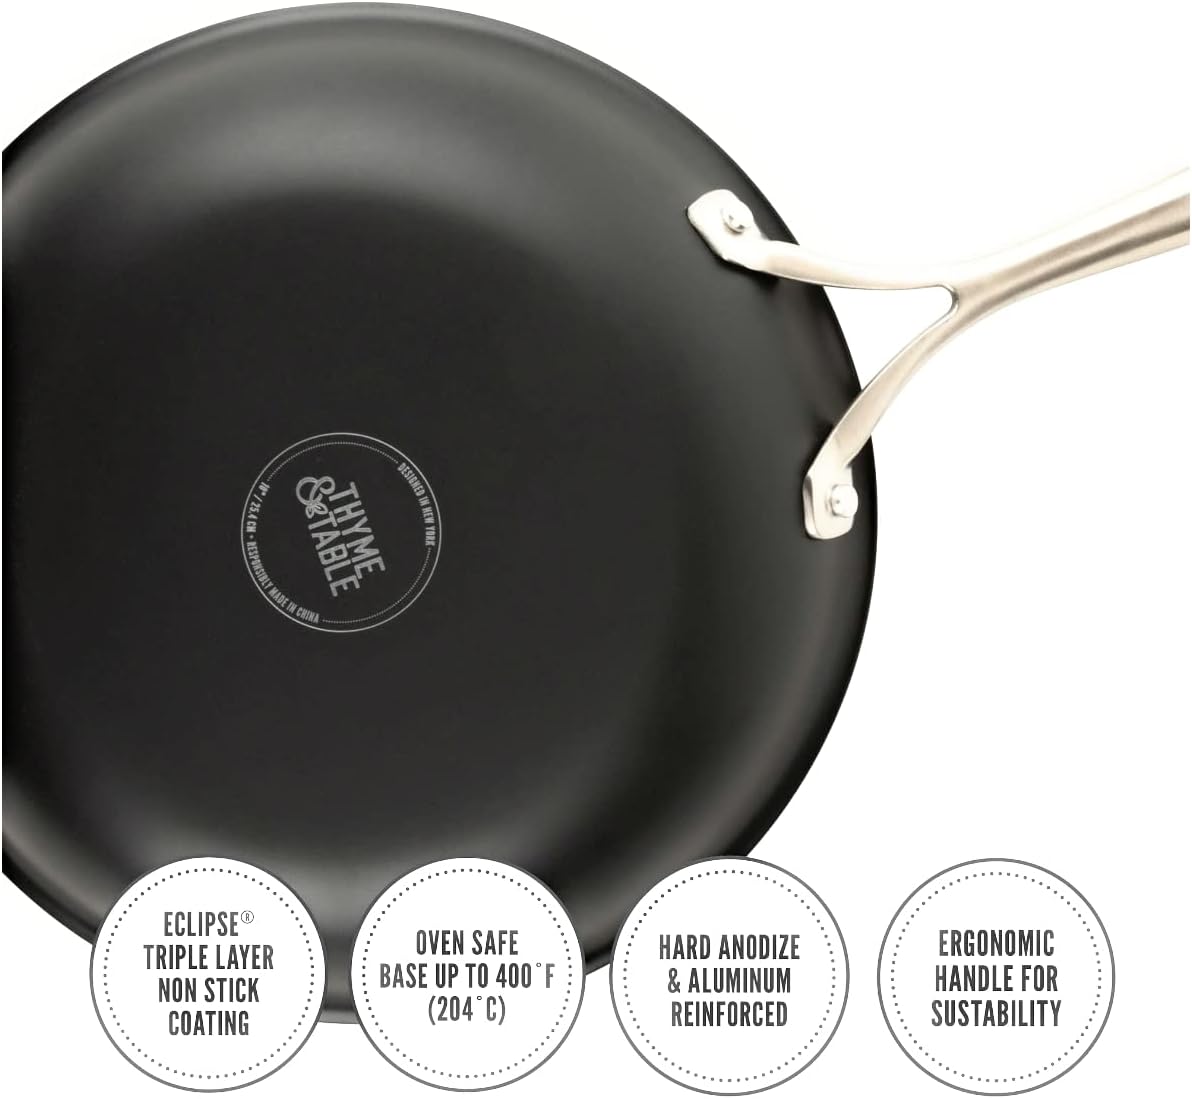 thyme and table 10 inch fry pan